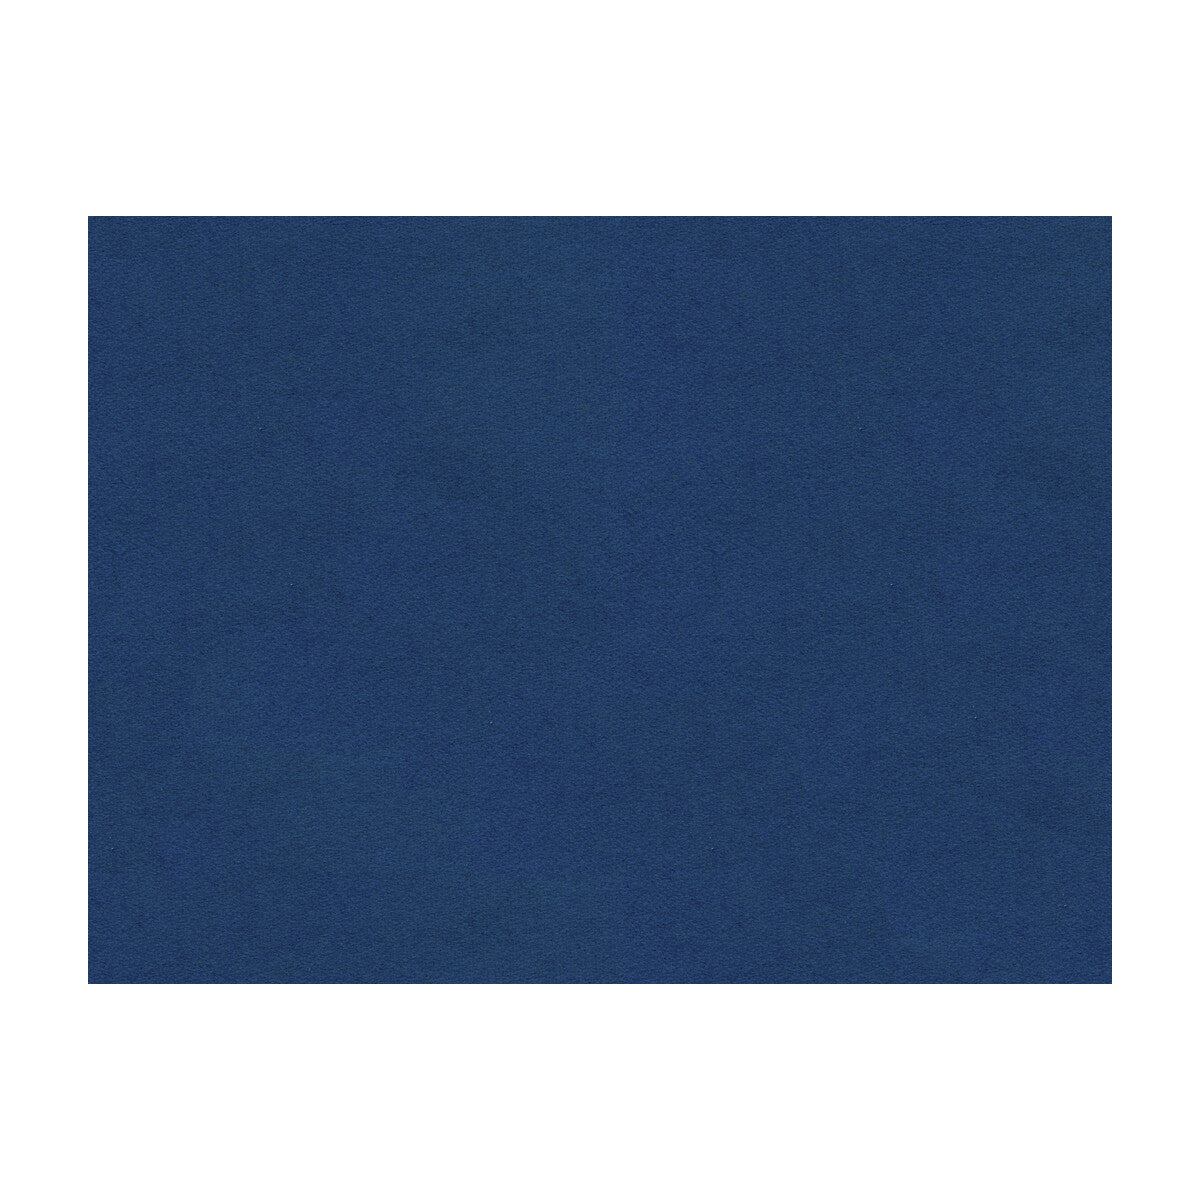 Chevalier Wool fabric in lapis color - pattern 8013149.55.0 - by Brunschwig &amp; Fils